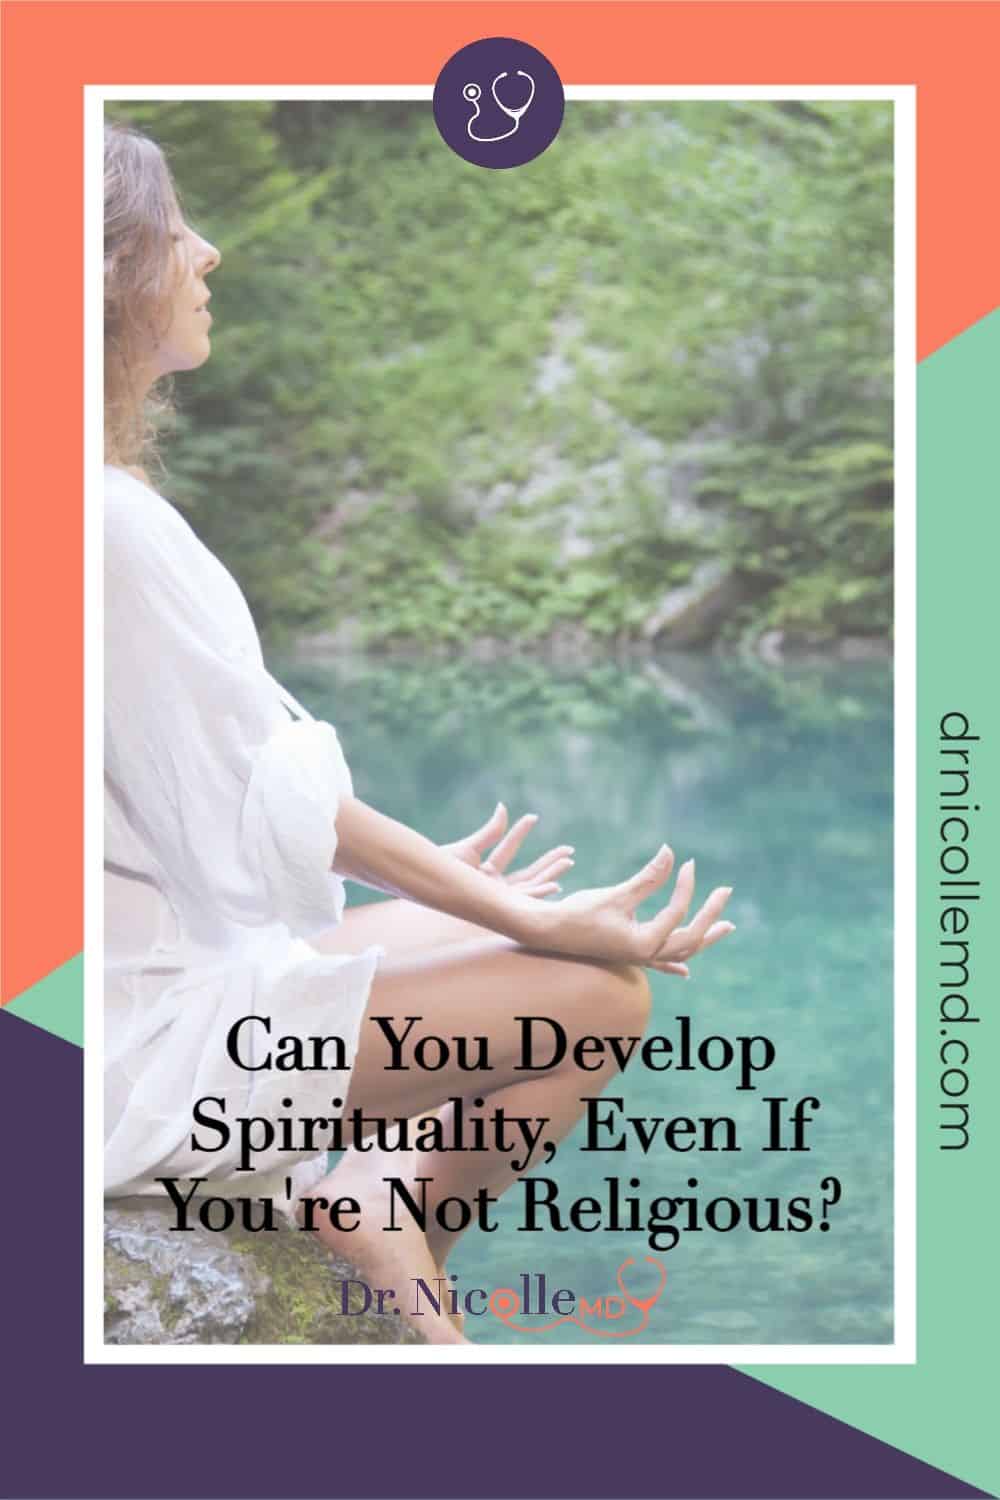 Developing Spirituality, Even if You’re Not Religious